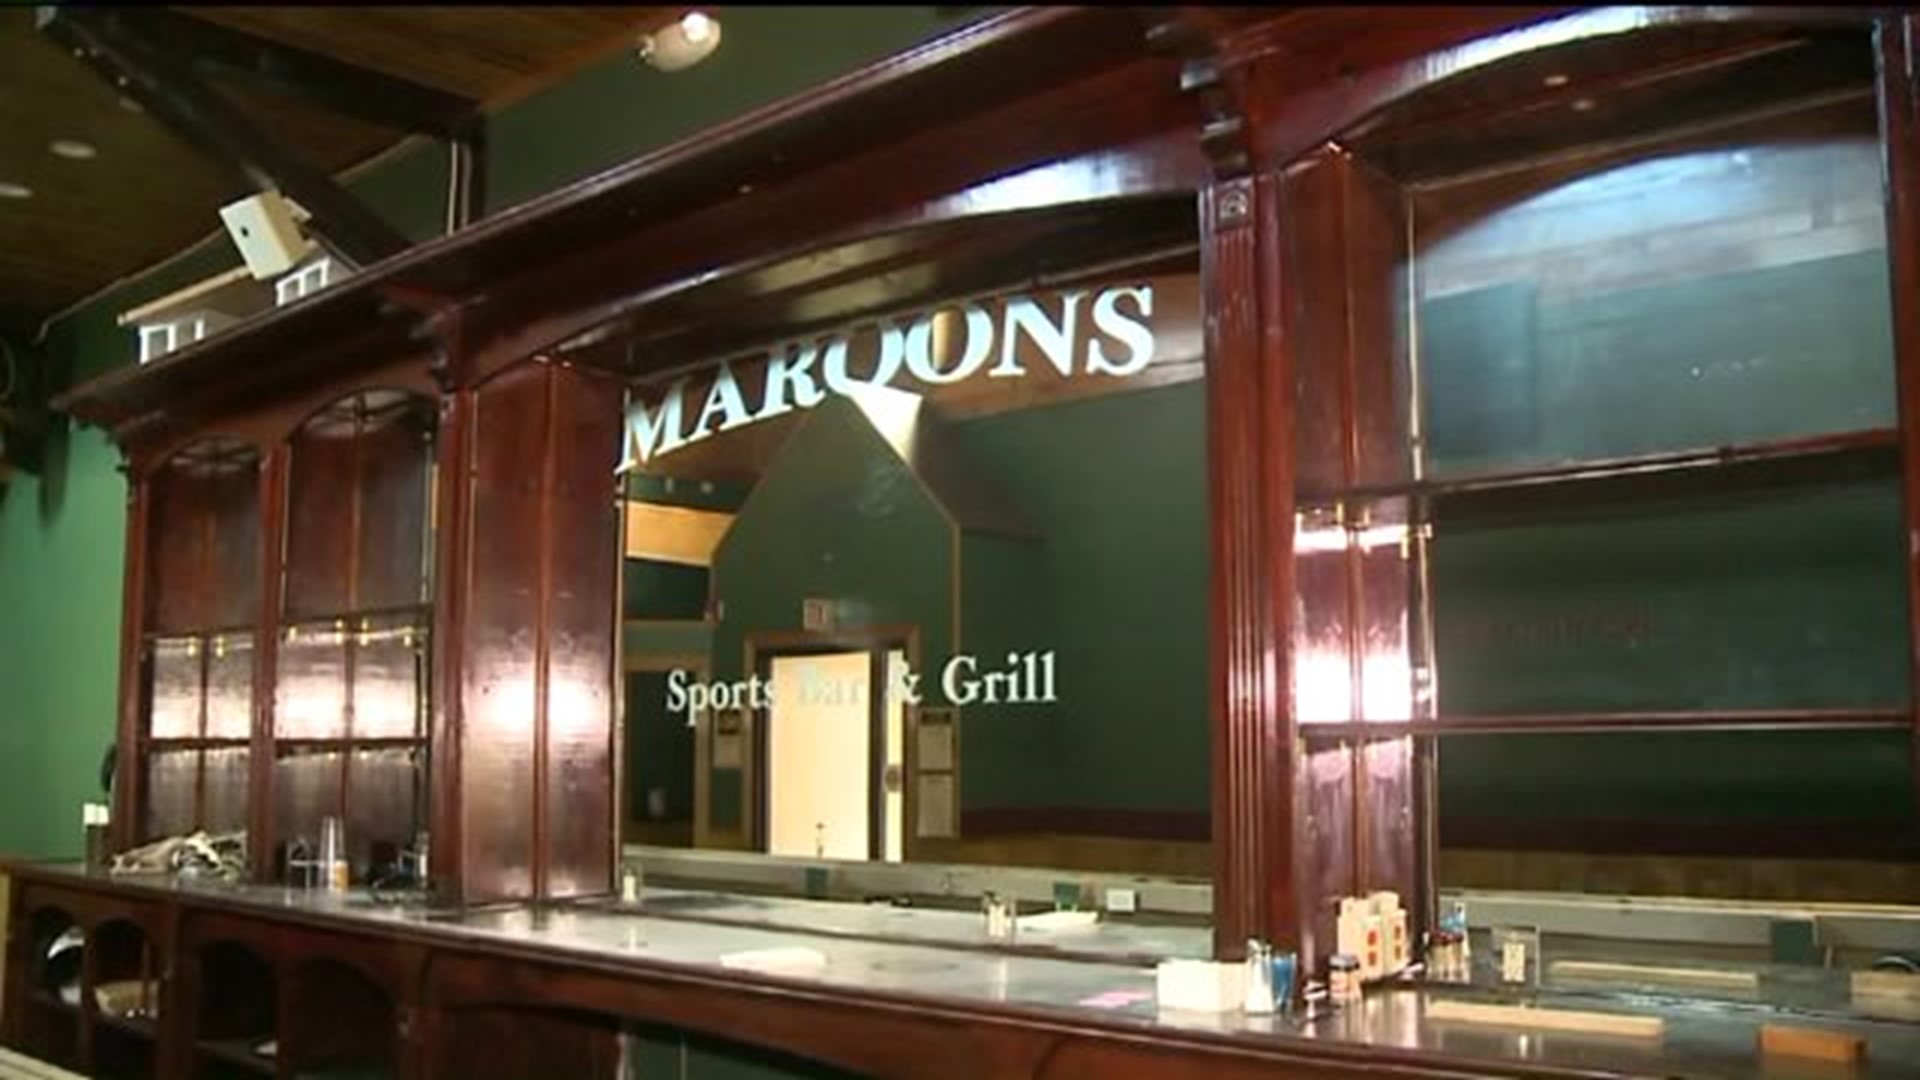 Will Maroons Stay Maroons?